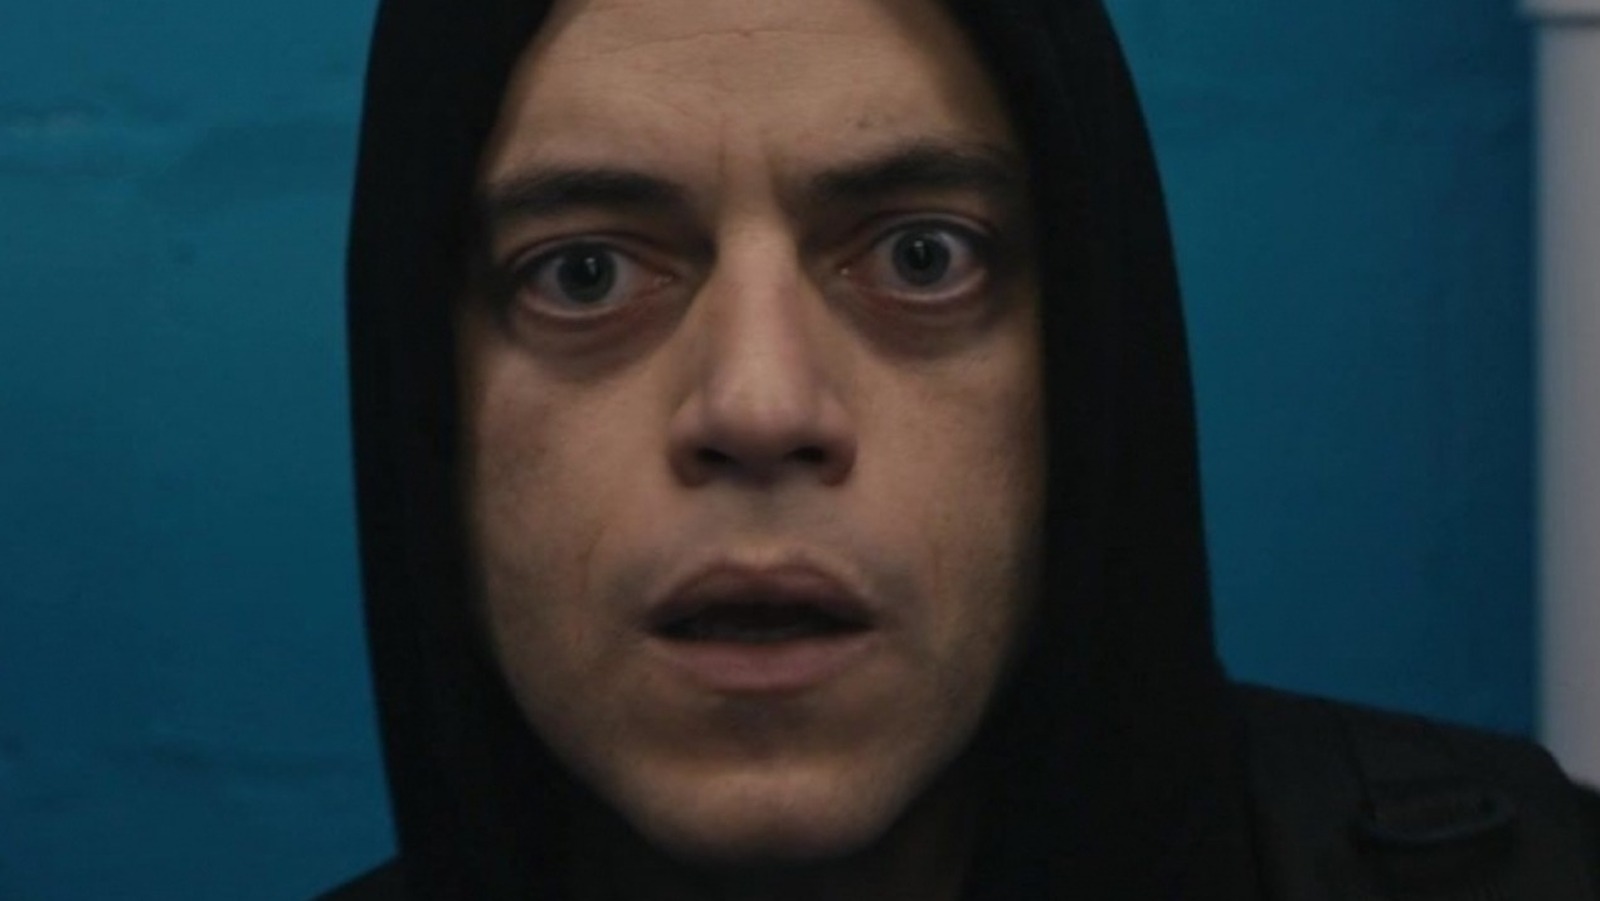 Mr. Robot Season Finale, Explained: Here's What Happened